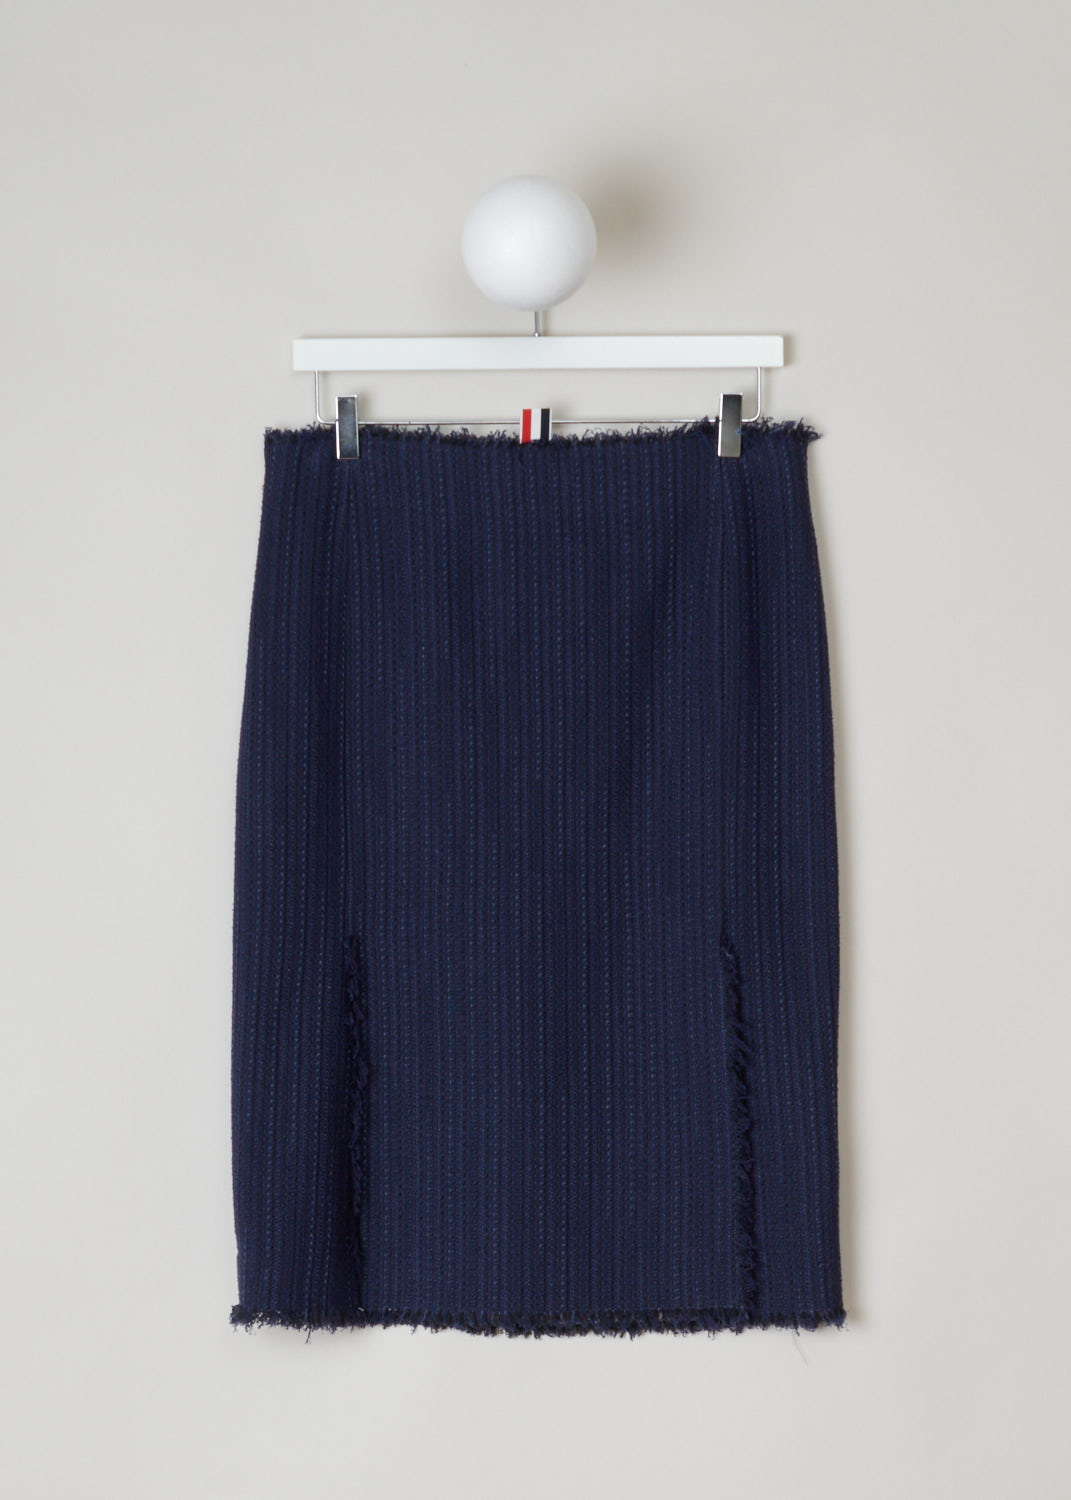 Thom Browne, Blue knitted pencil skirt, FGC452T_04529_415_navy, blue, back. Starting from the top this lovely pencil skirt has raw frilled edges. Zipper on the side for fastening. Also the hem is similarly unfinished and has frills hanging off. On the back this model has two splits.